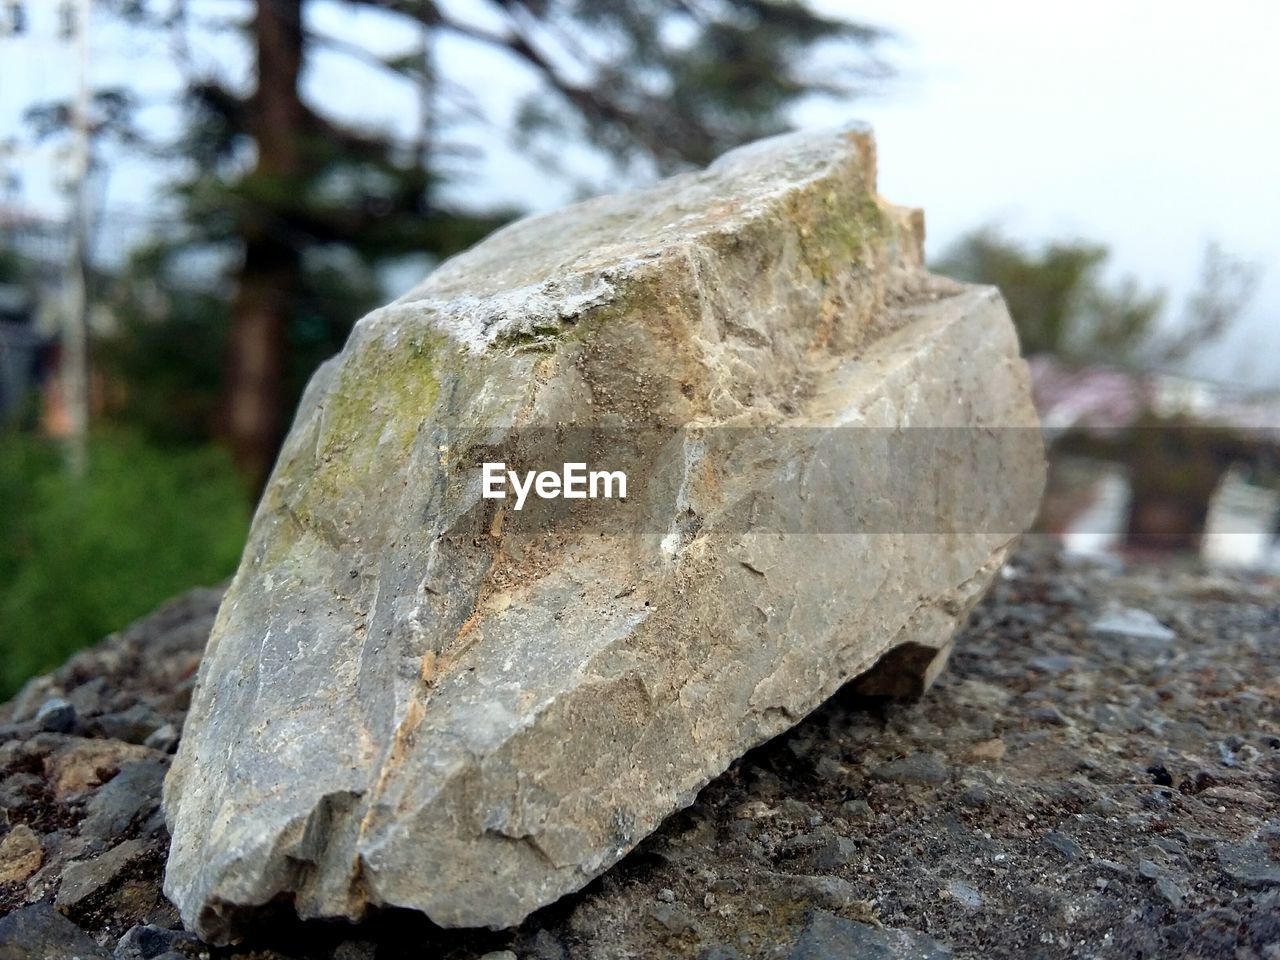 A rock with beautiful texture on it and a green tree behind the textured stone.